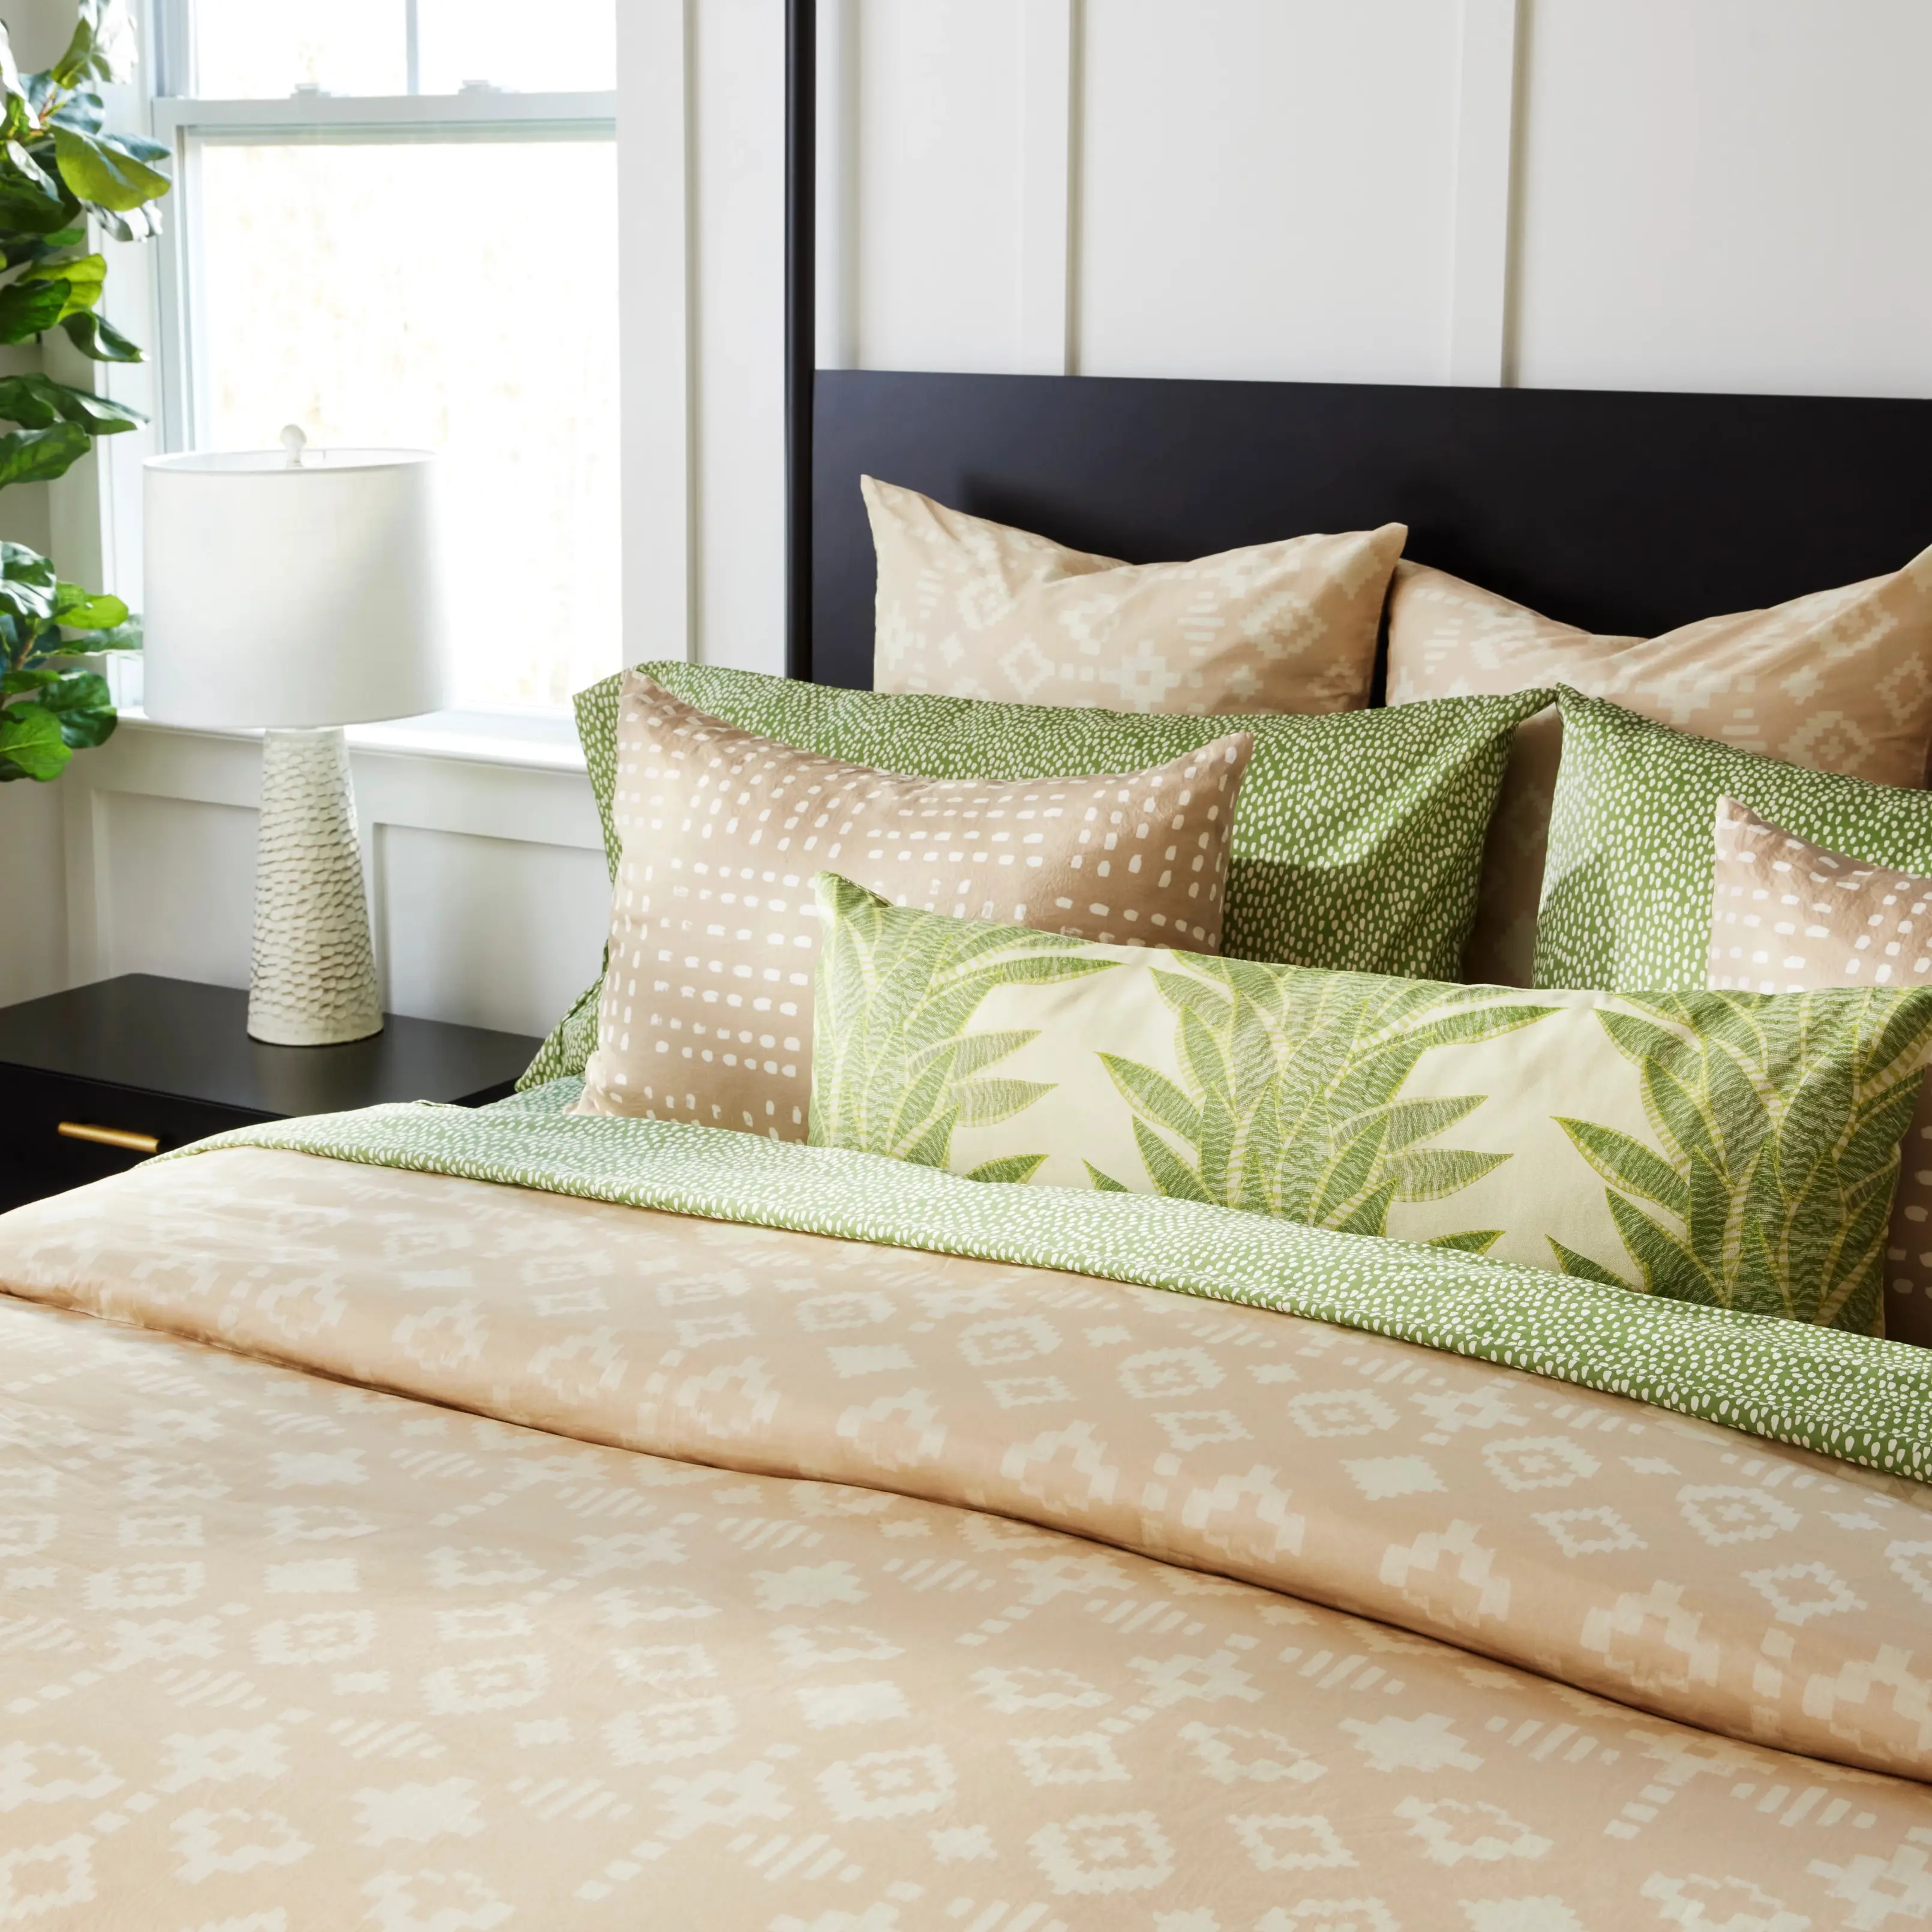 Tan and green Spoonflower bedding.